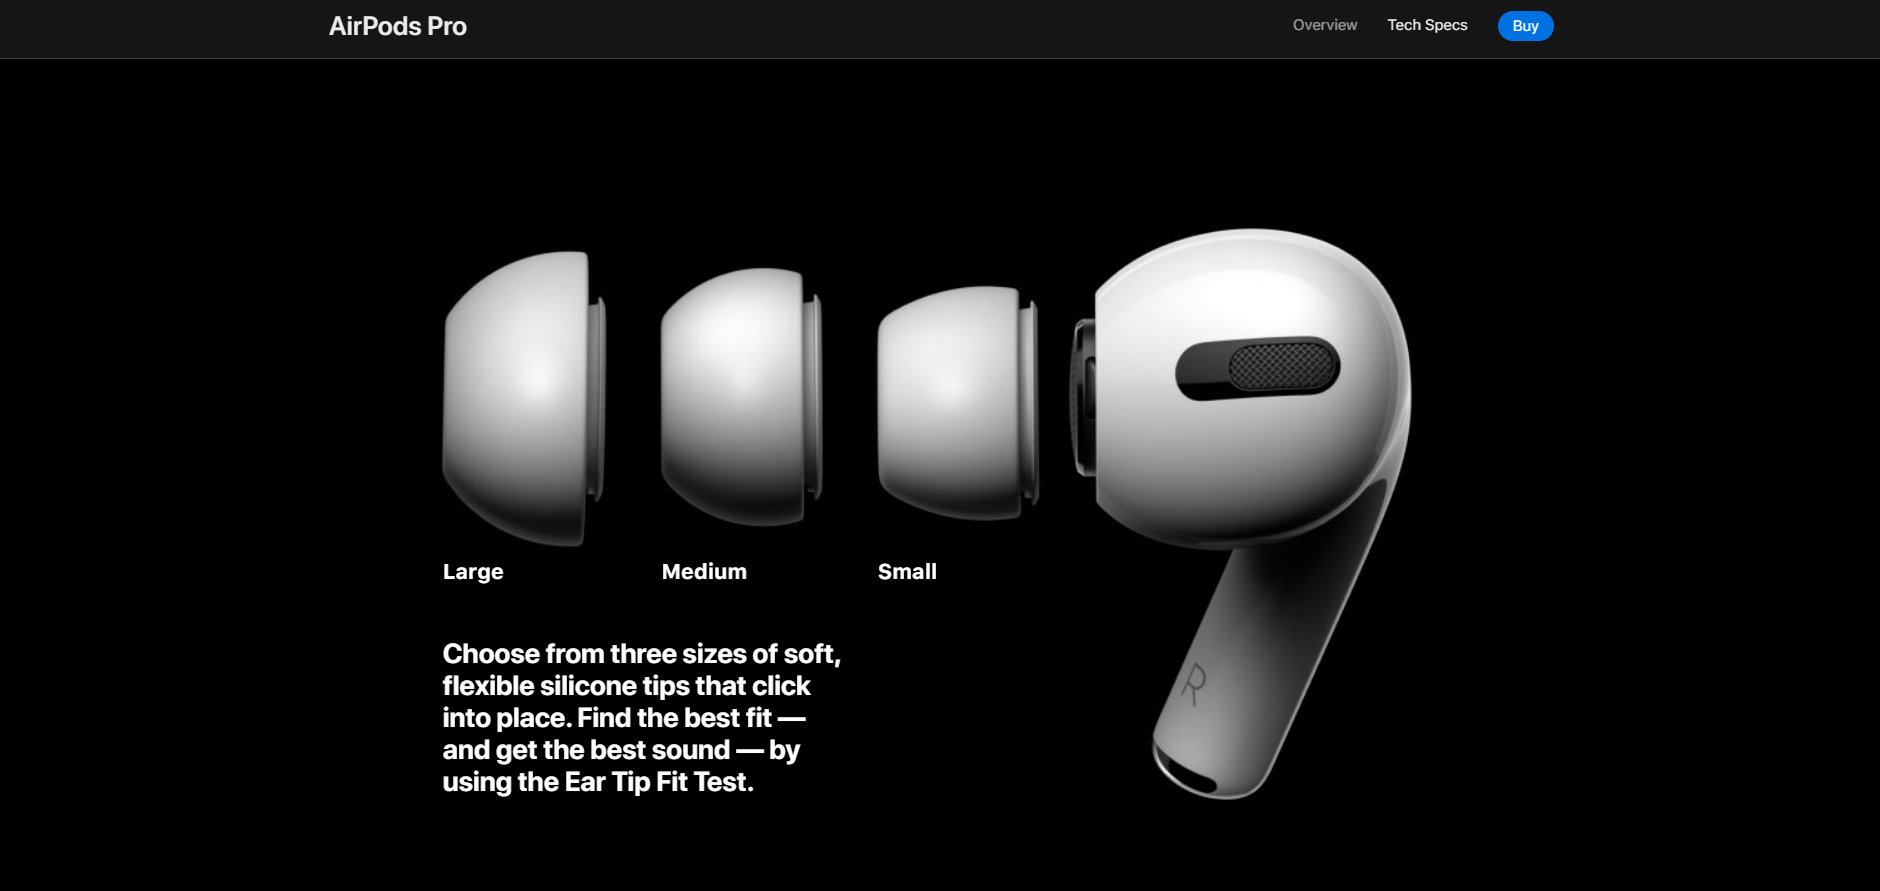 The AirPods Pro parallax website